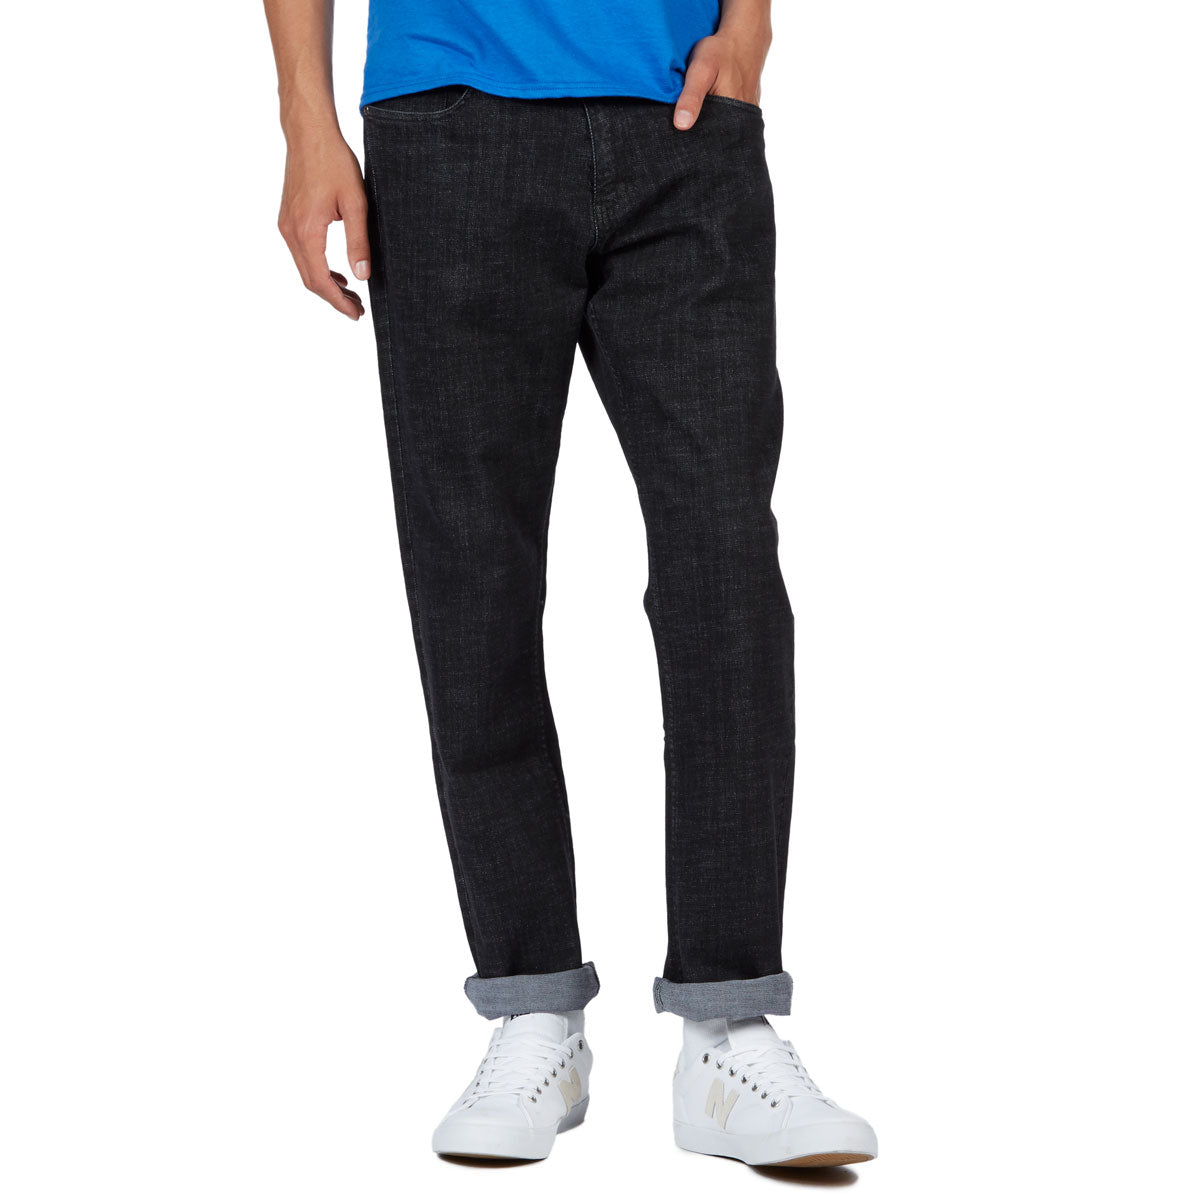 CCS Relaxed Fit Jeans - Washed Black image 1